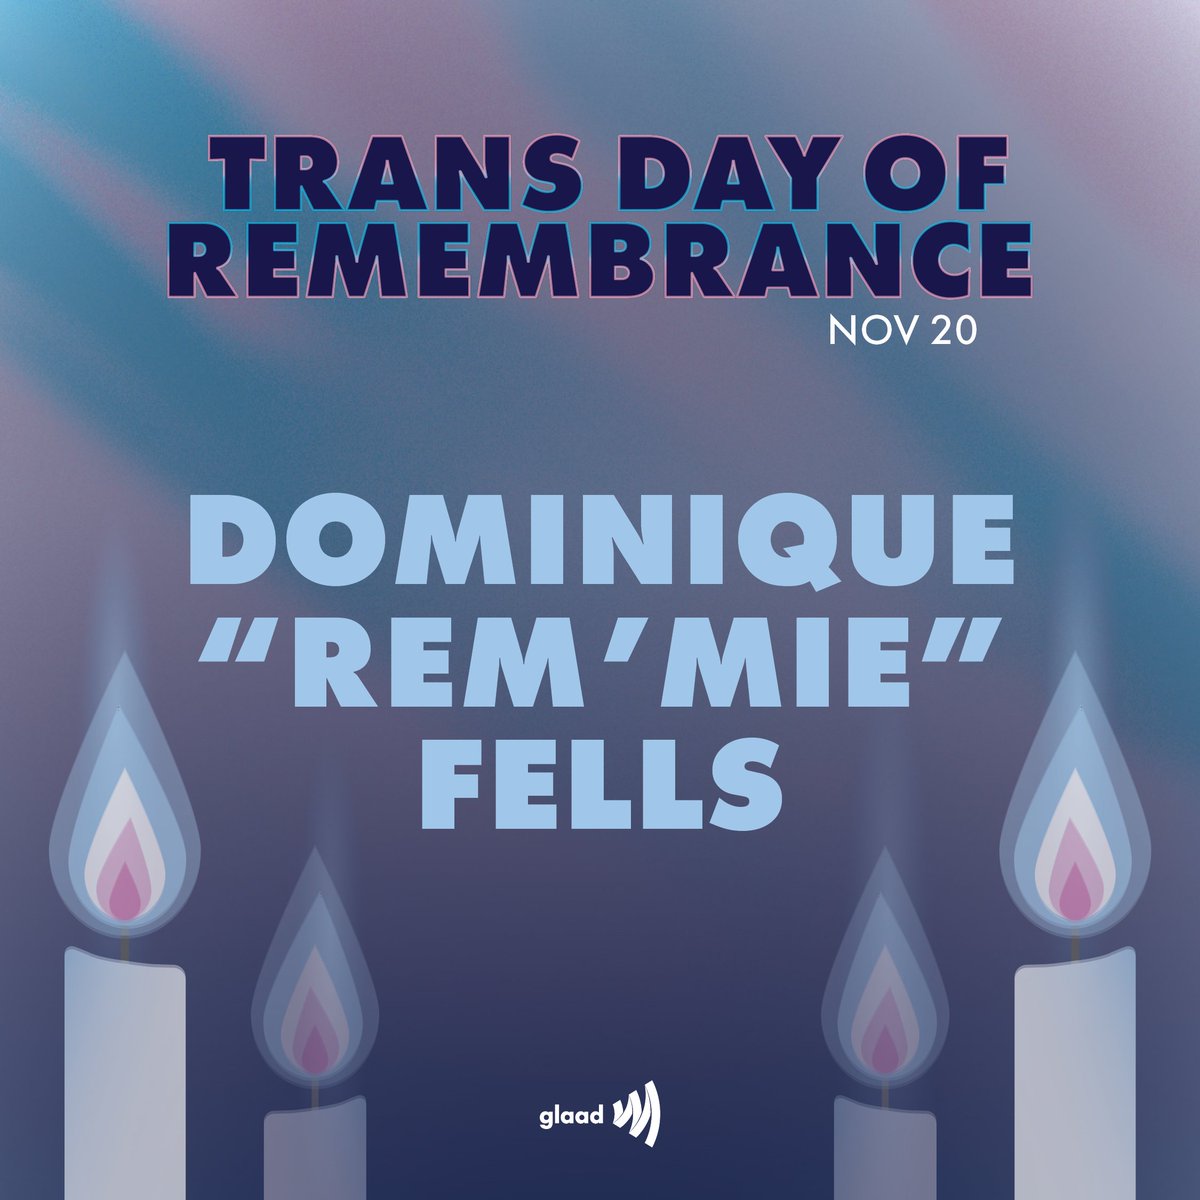 Dominique “Rem’mie” Fells, a Black transgender woman, was killed in Philadelphia, Pennsylvania on June 9, 2020. Her friends remember her as a unique and beautiful soul.